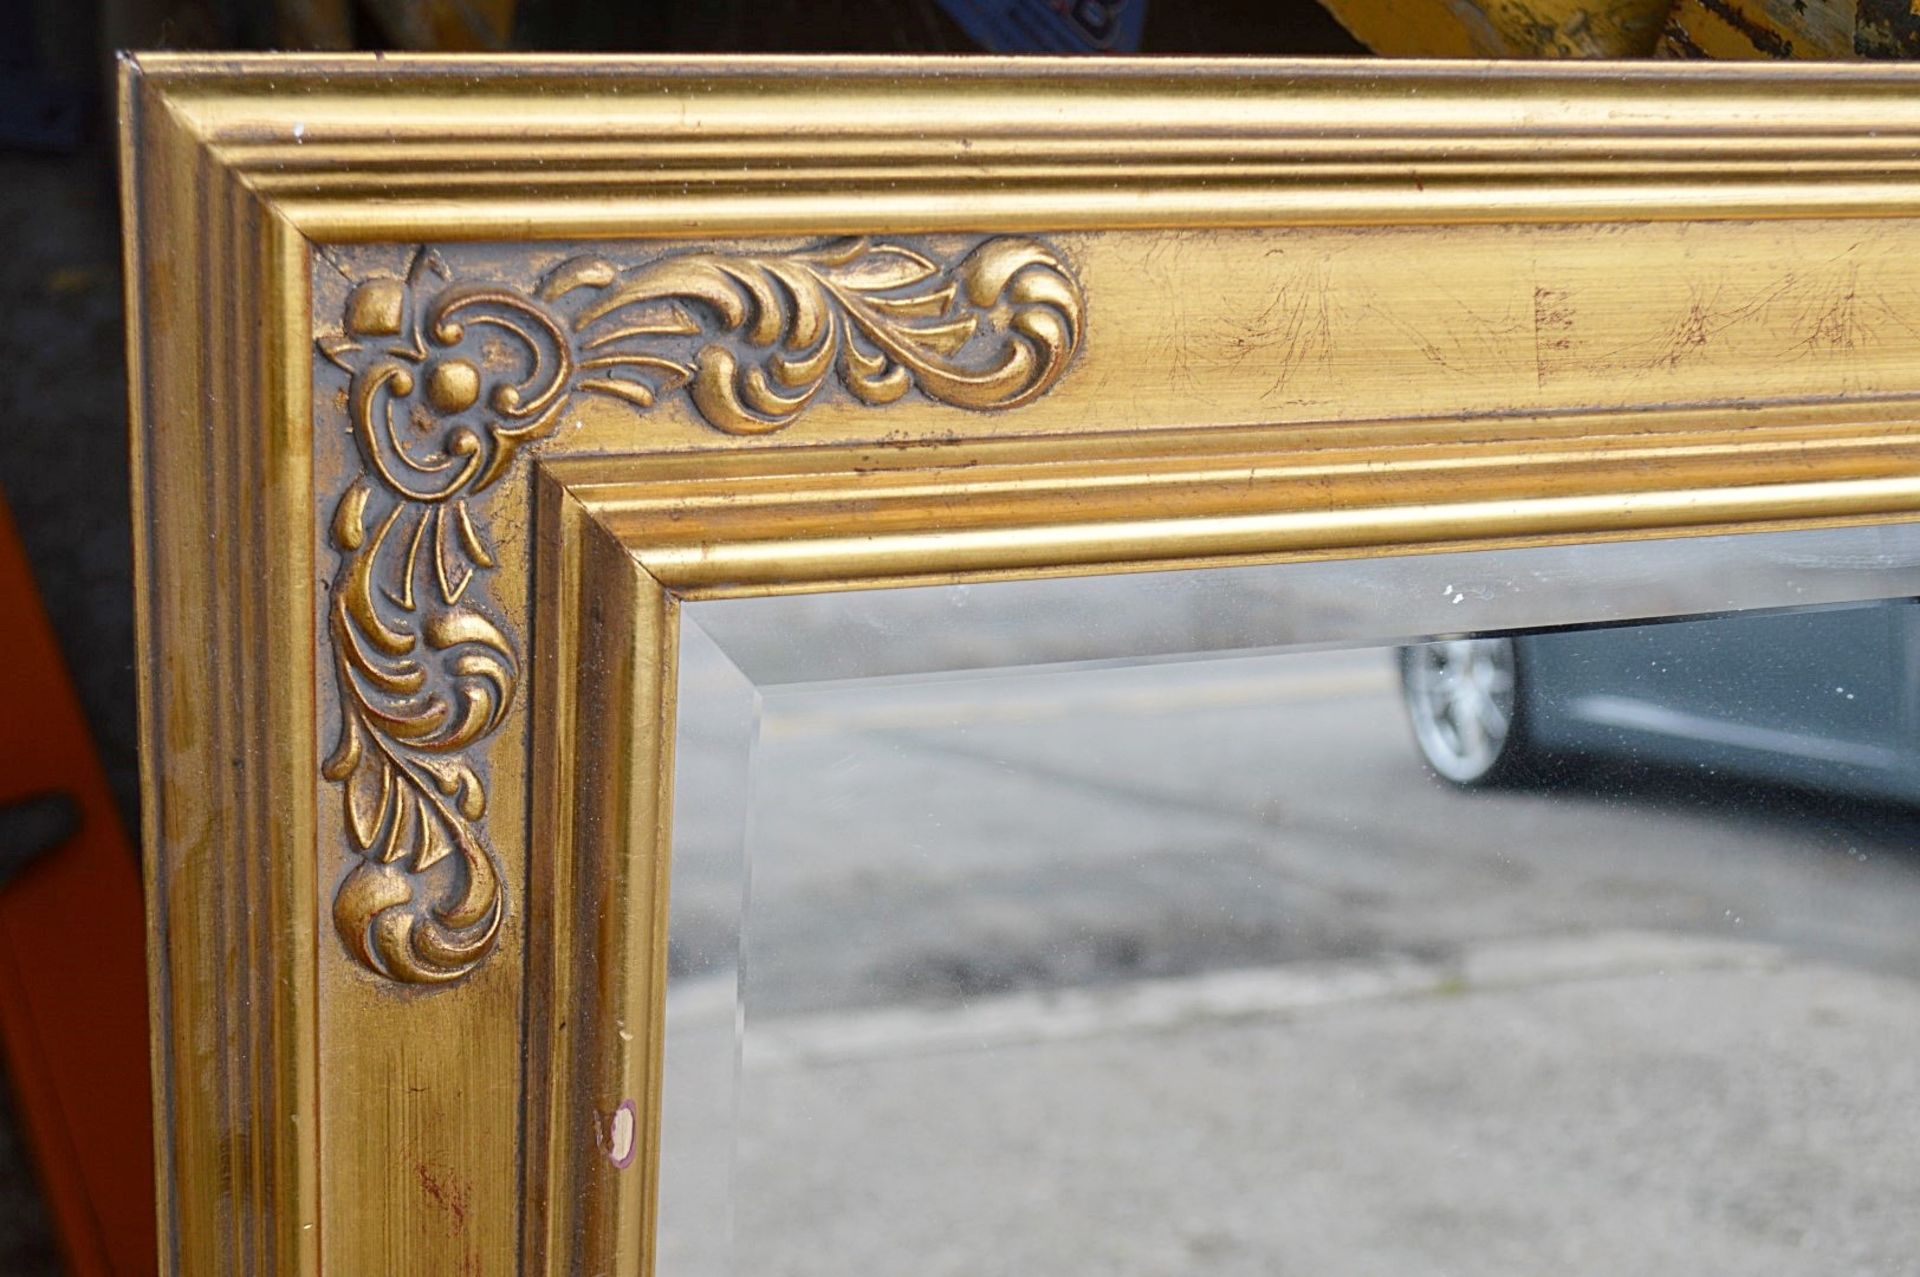 1 x Large Statement Mirror In A Gold Frame With An Aged Finish - Dimensions: 141 x 110cm - Image 4 of 5